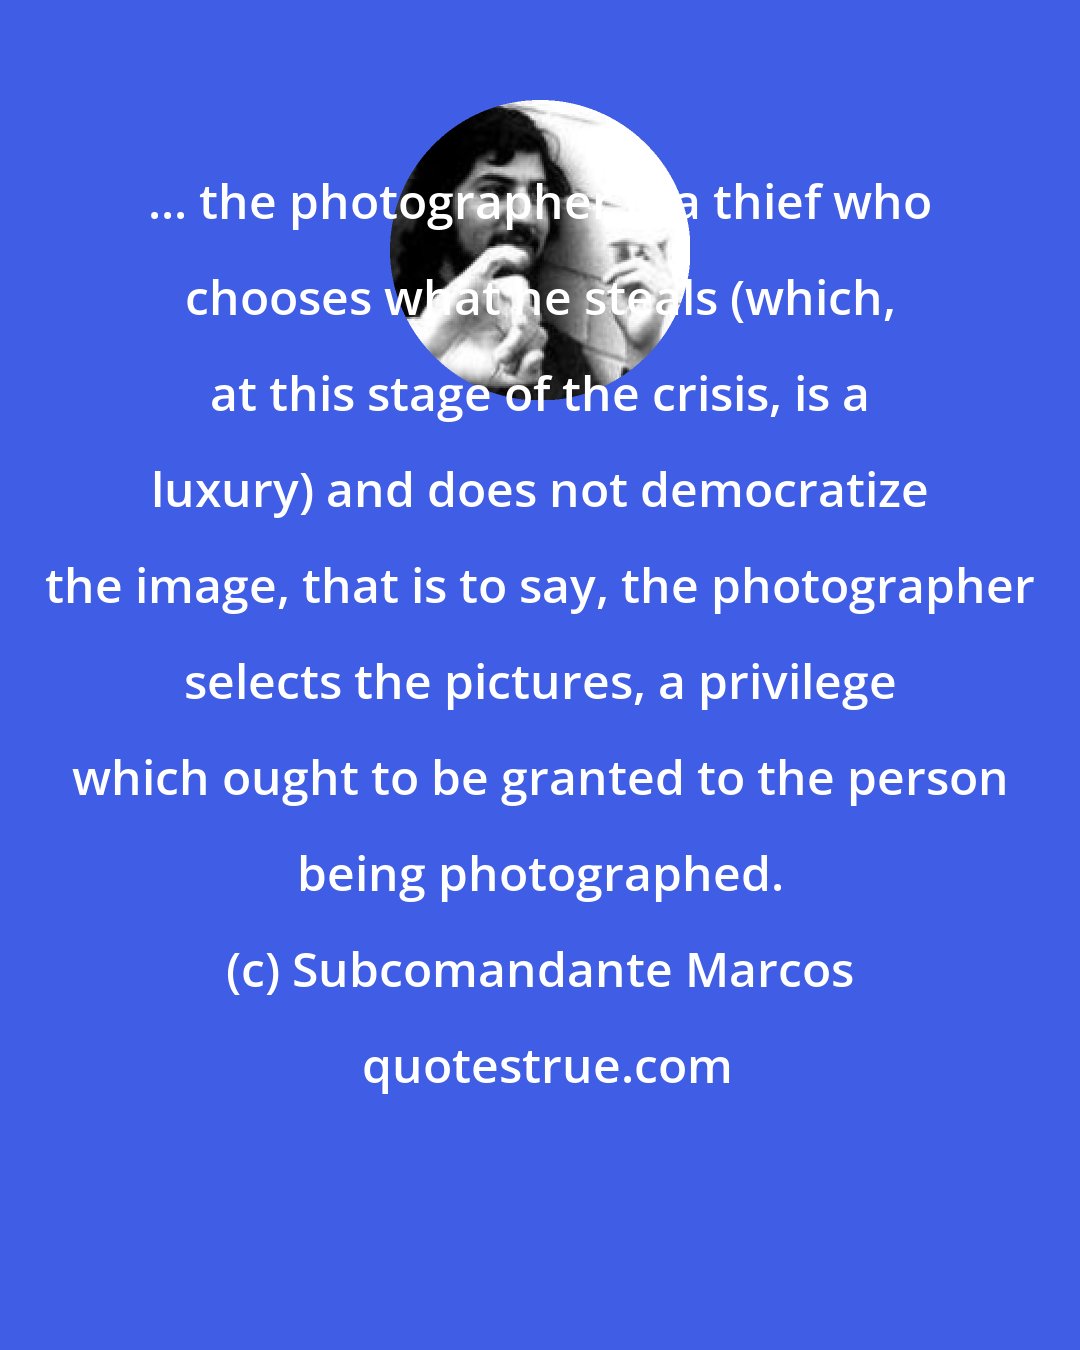 Subcomandante Marcos: ... the photographer is a thief who chooses what he steals (which, at this stage of the crisis, is a luxury) and does not democratize the image, that is to say, the photographer selects the pictures, a privilege which ought to be granted to the person being photographed.